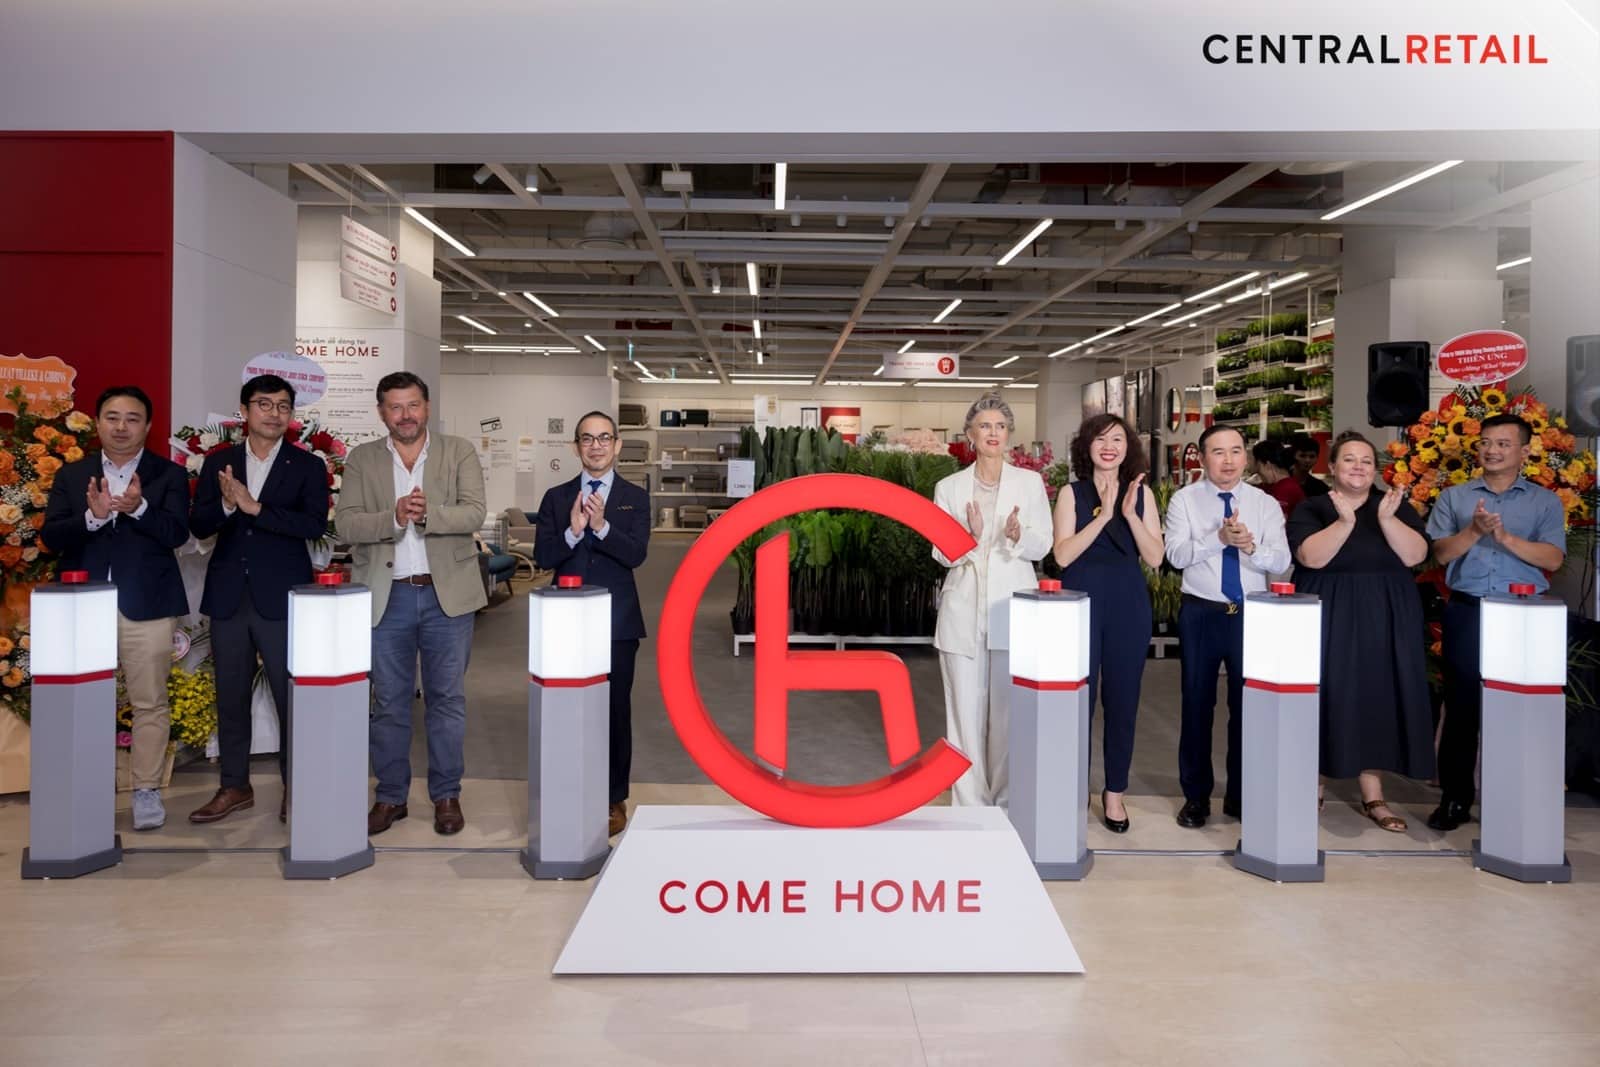 Come Home launched brand by Central Retail Vietnam, celebrated the grand opening of its second store at Lotte Mall Tay Ho in Hanoi